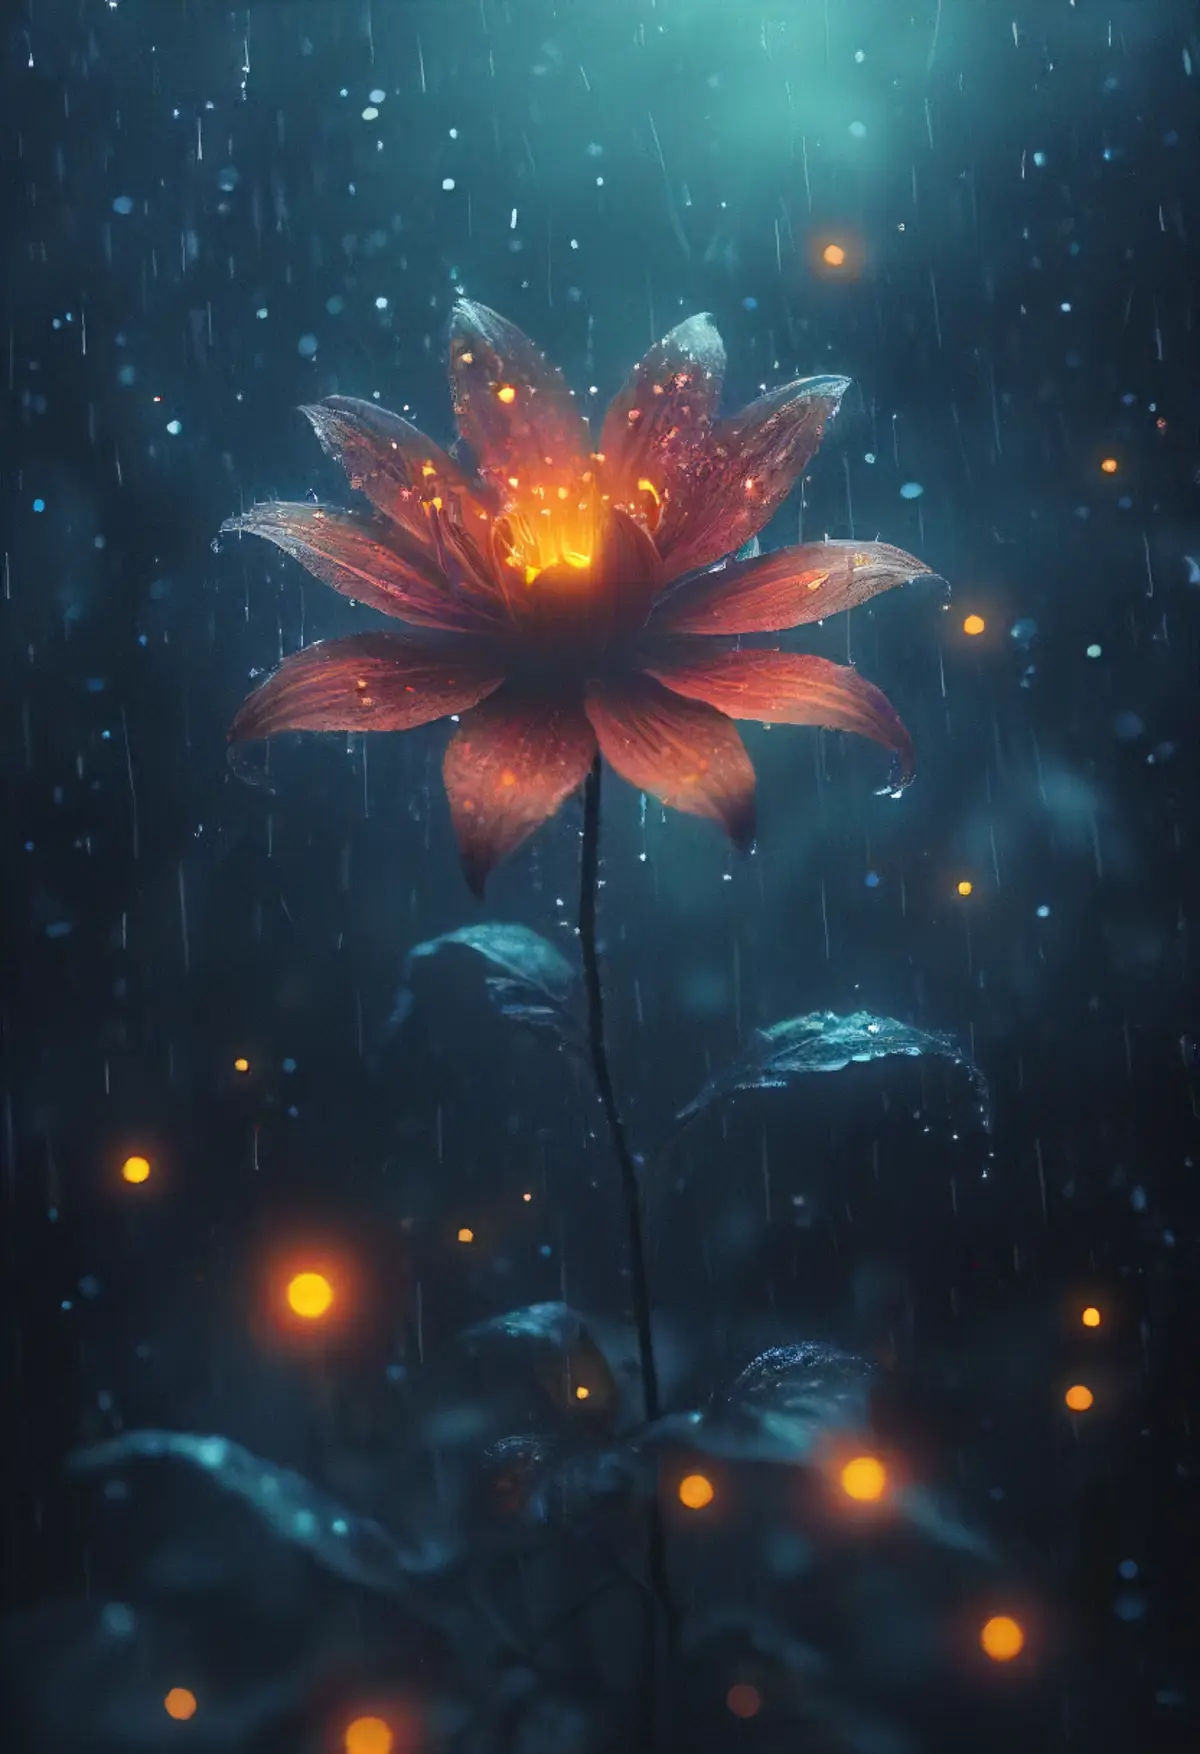 A flower with a glowing center, standing out against an unfocused blue backdrop of heavy rain. The flower’s petals are a rich red, with an orange glowing core, which illuminates the surrounding leaves. 